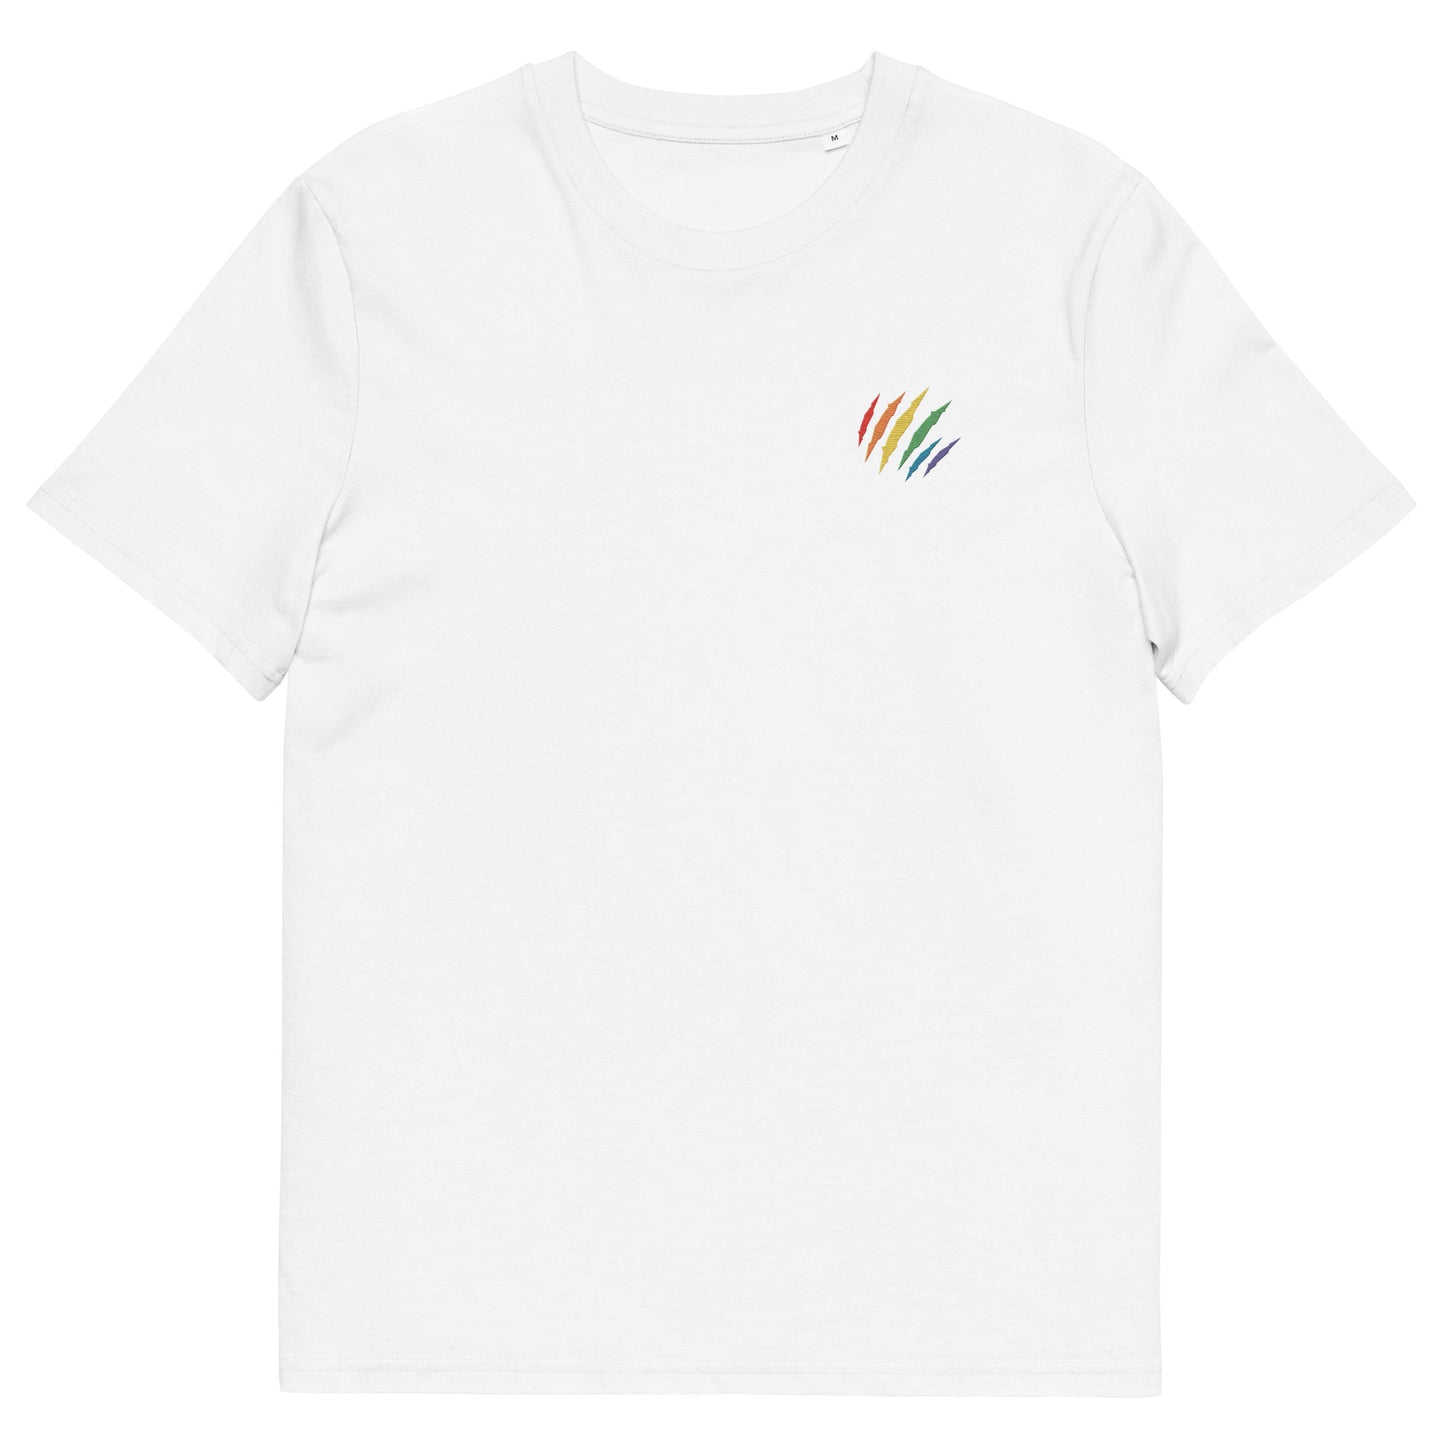 Fitted white organic cotton t-shirt with an embroidered scratch in the rainbow colors on the left chest. Available in sizes S to 3XL.